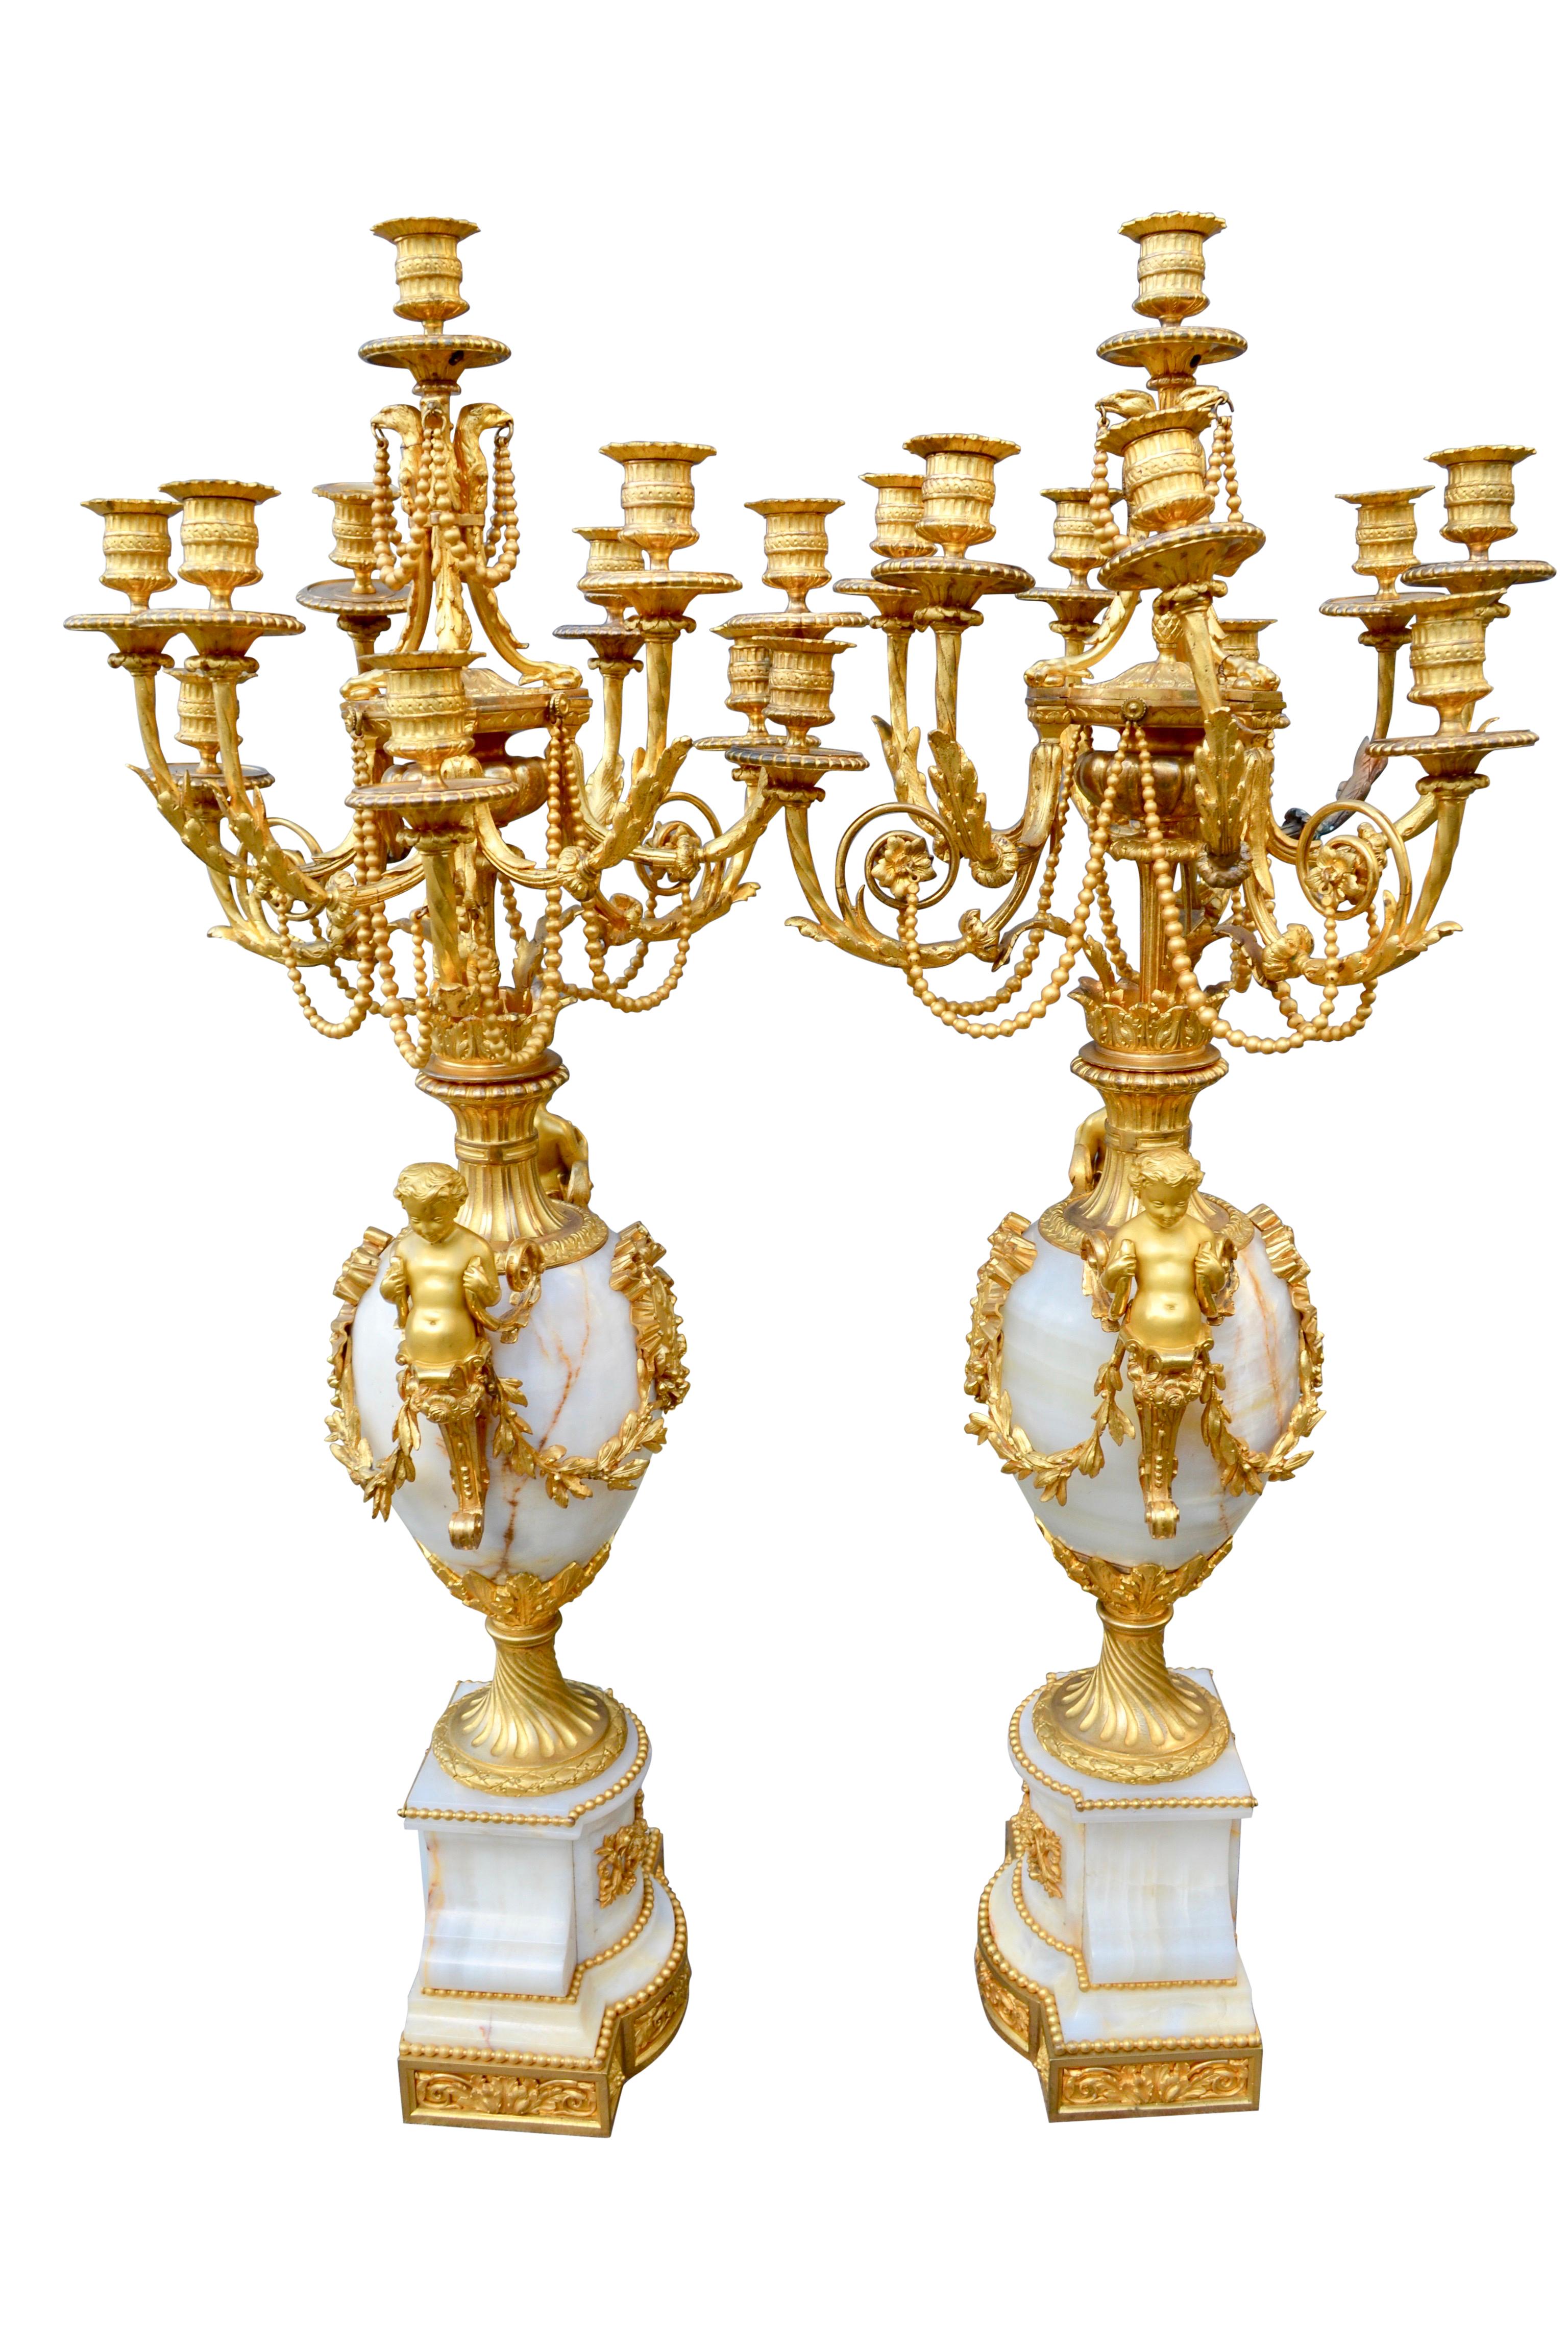 19th Century Palatial Scale Onyx and Gilt Bronze Napoleon III Candelabra For Sale